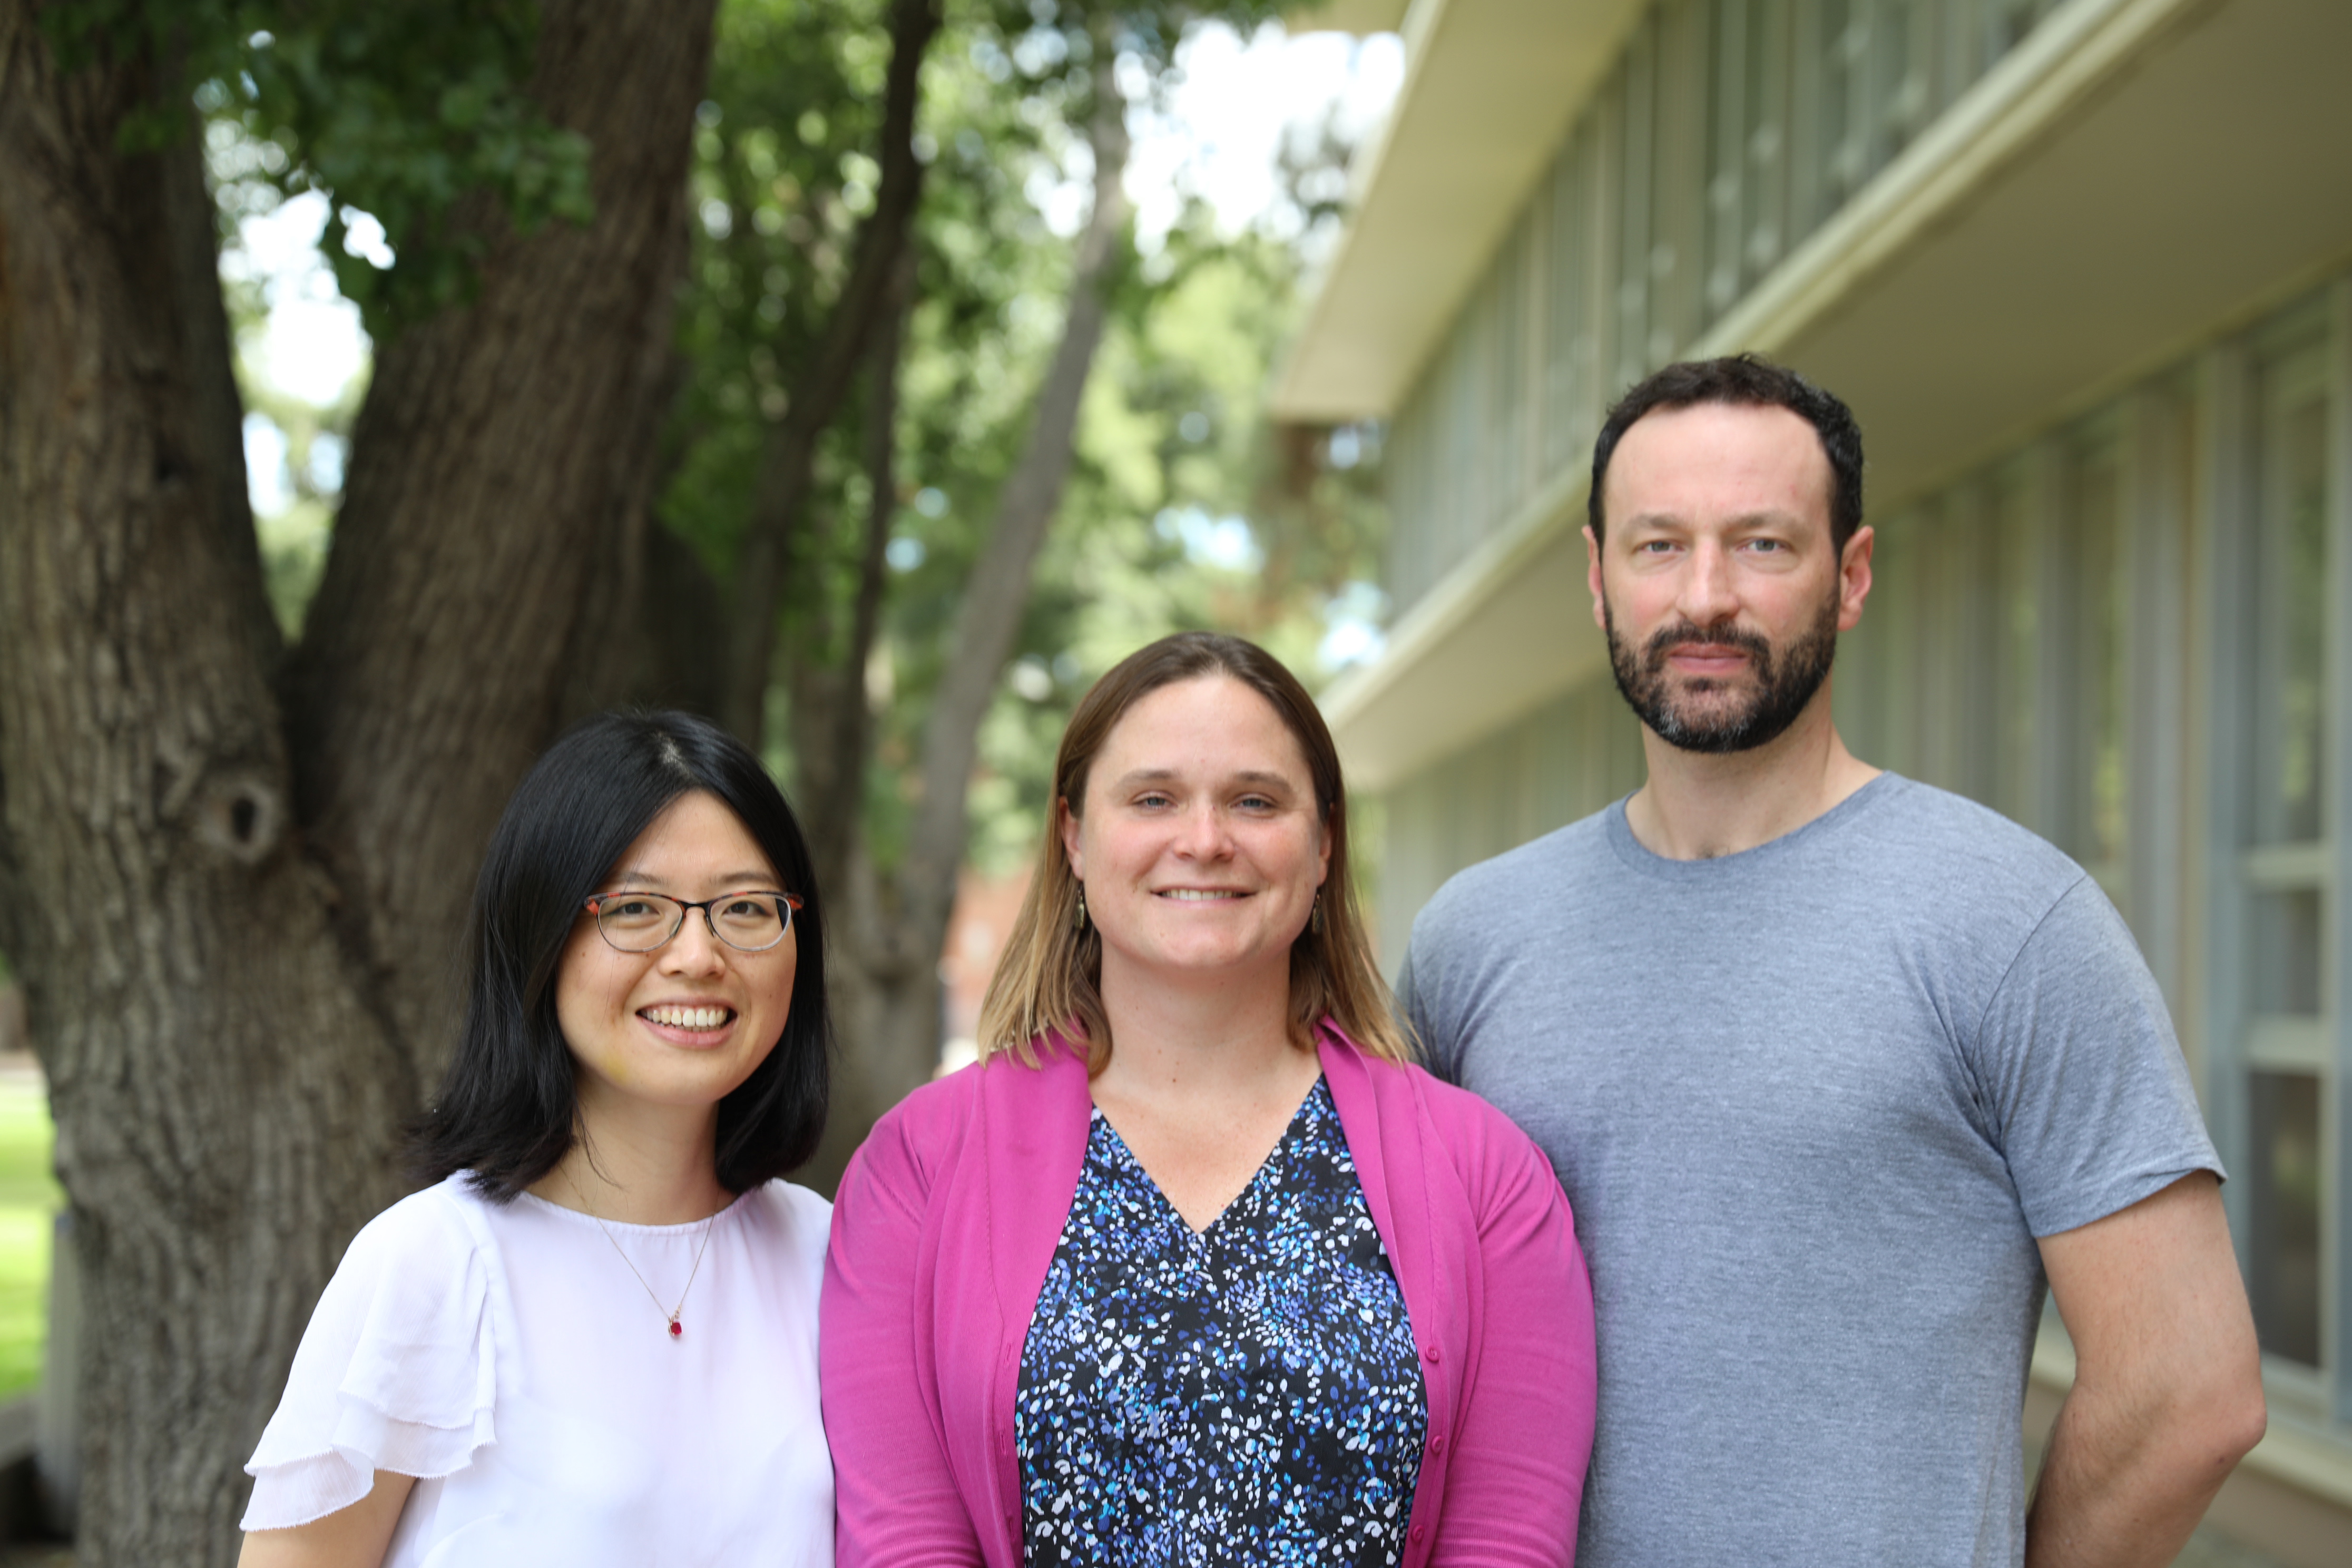 Xiaoli Dong and Frances C. Moore, who are both assistant professors in the Department of Environmental Science and Policy at UC Davis, with Marc N. Conte, an associate professor in the Department of Economics at Fordham University, outside Wickson Hall at UC Davis. (UC Davis Photo)